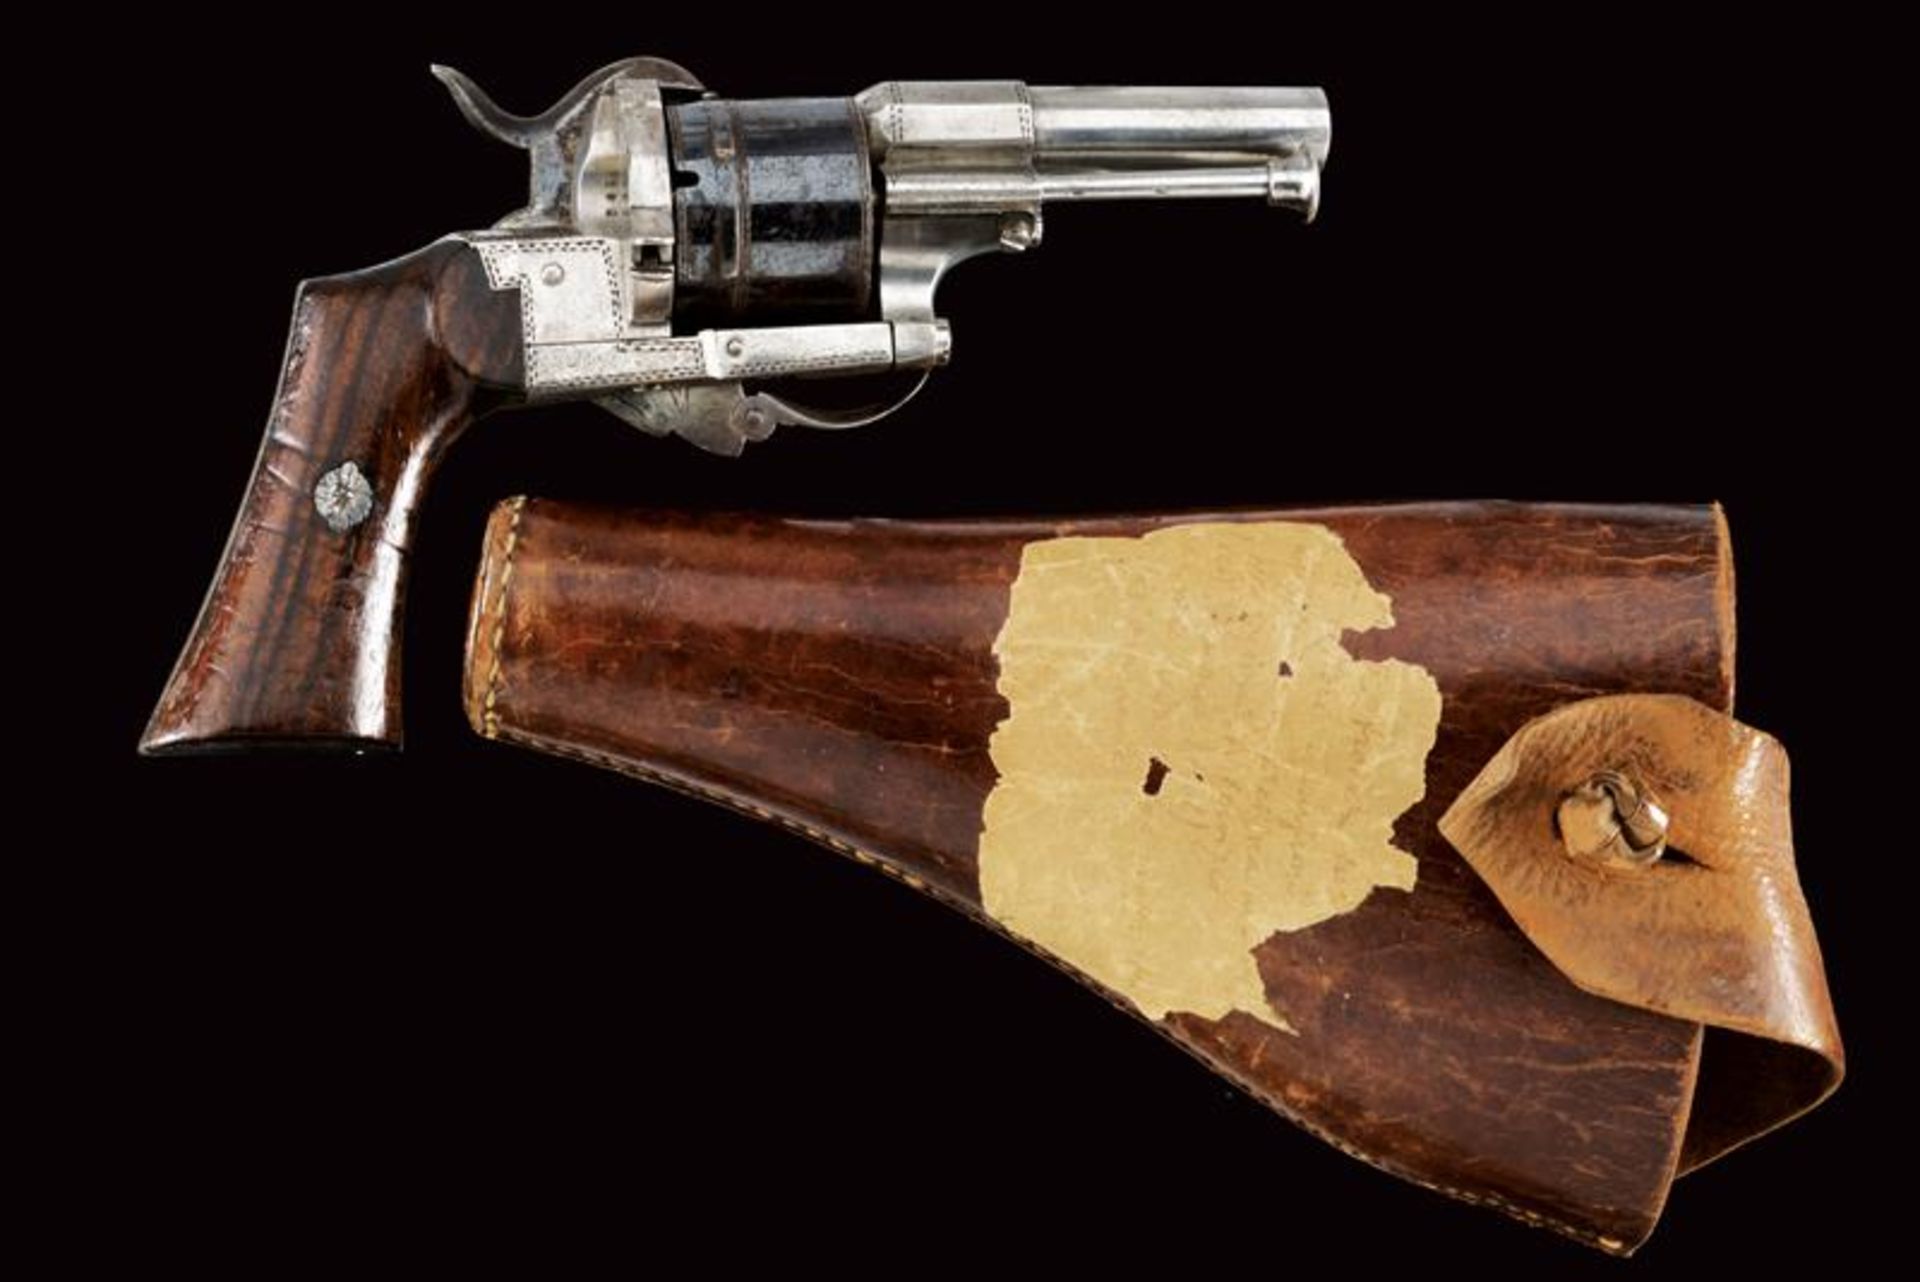 A Lefaucheux pin-fire revolver kept in leather holster